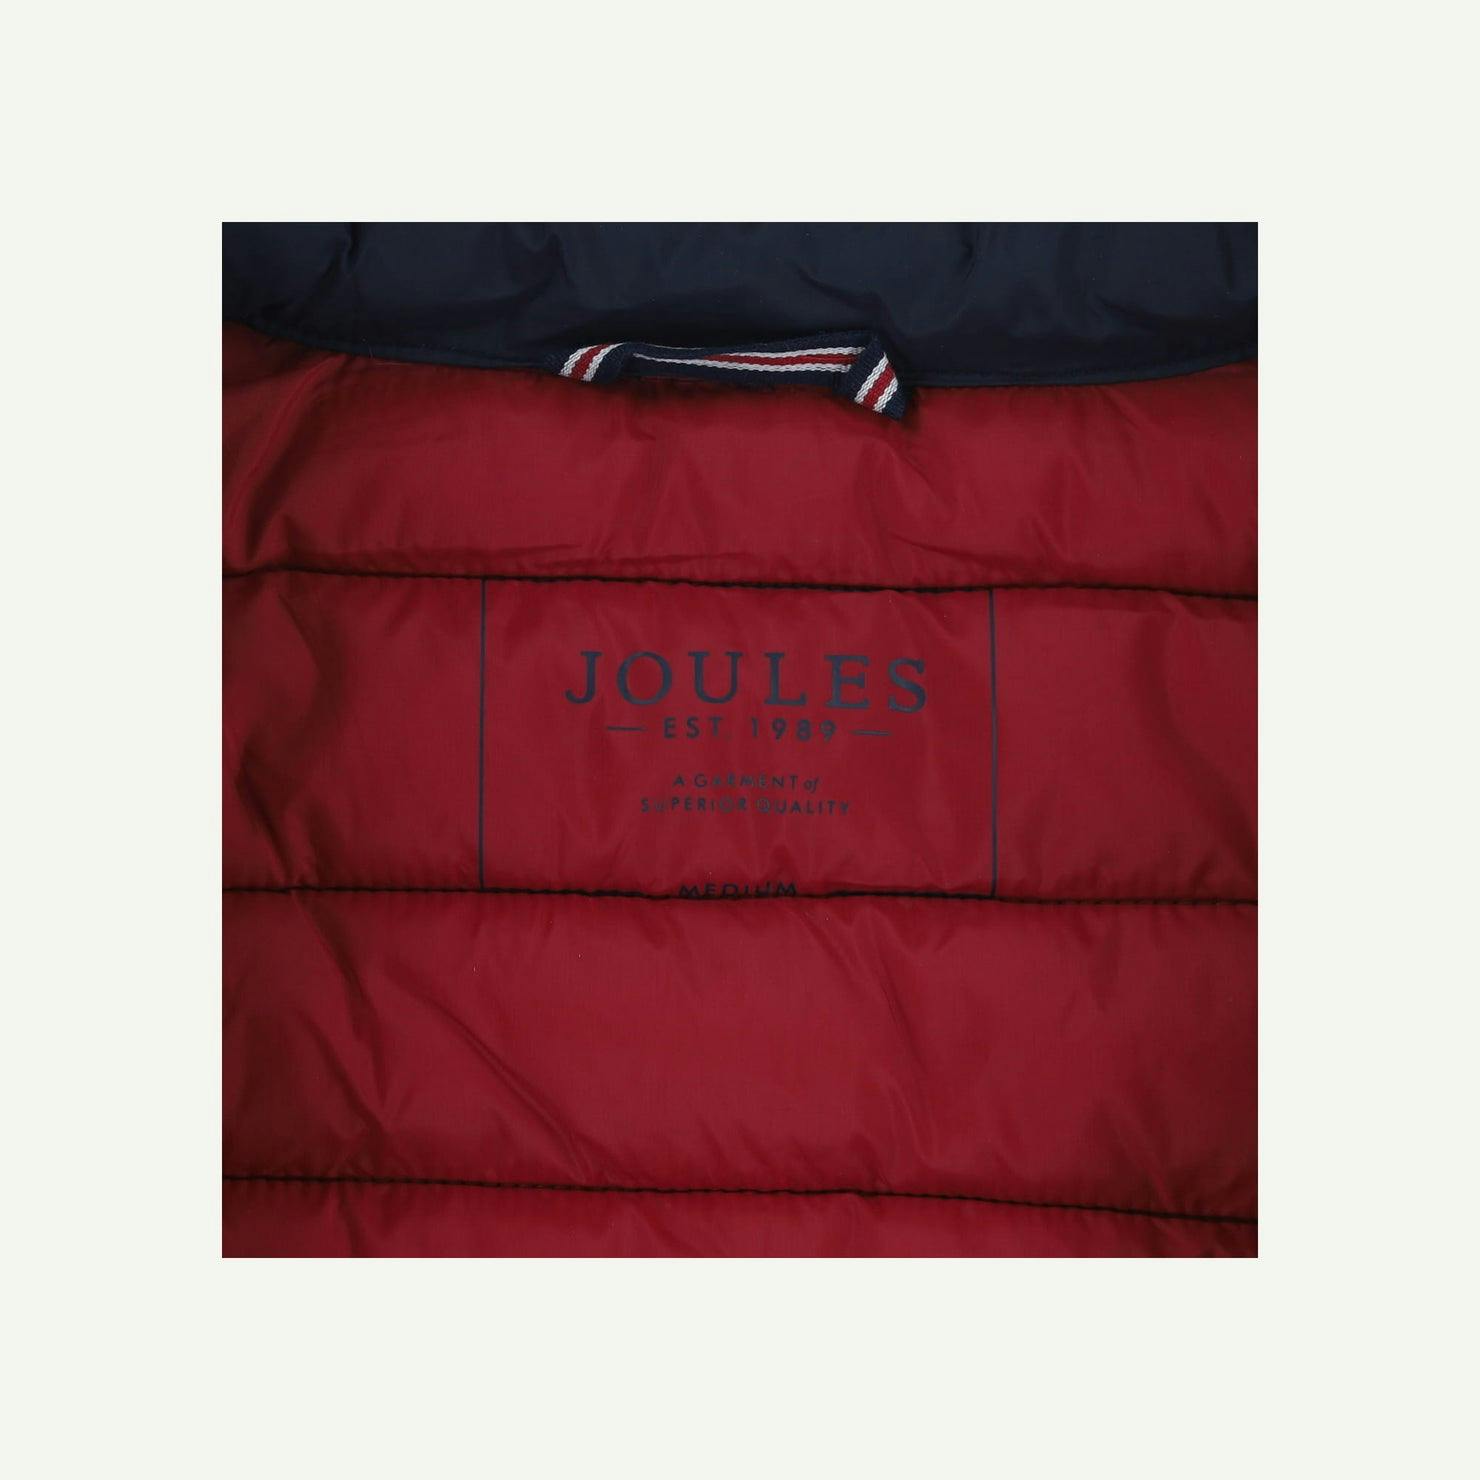 Joules As new Navy Gilet